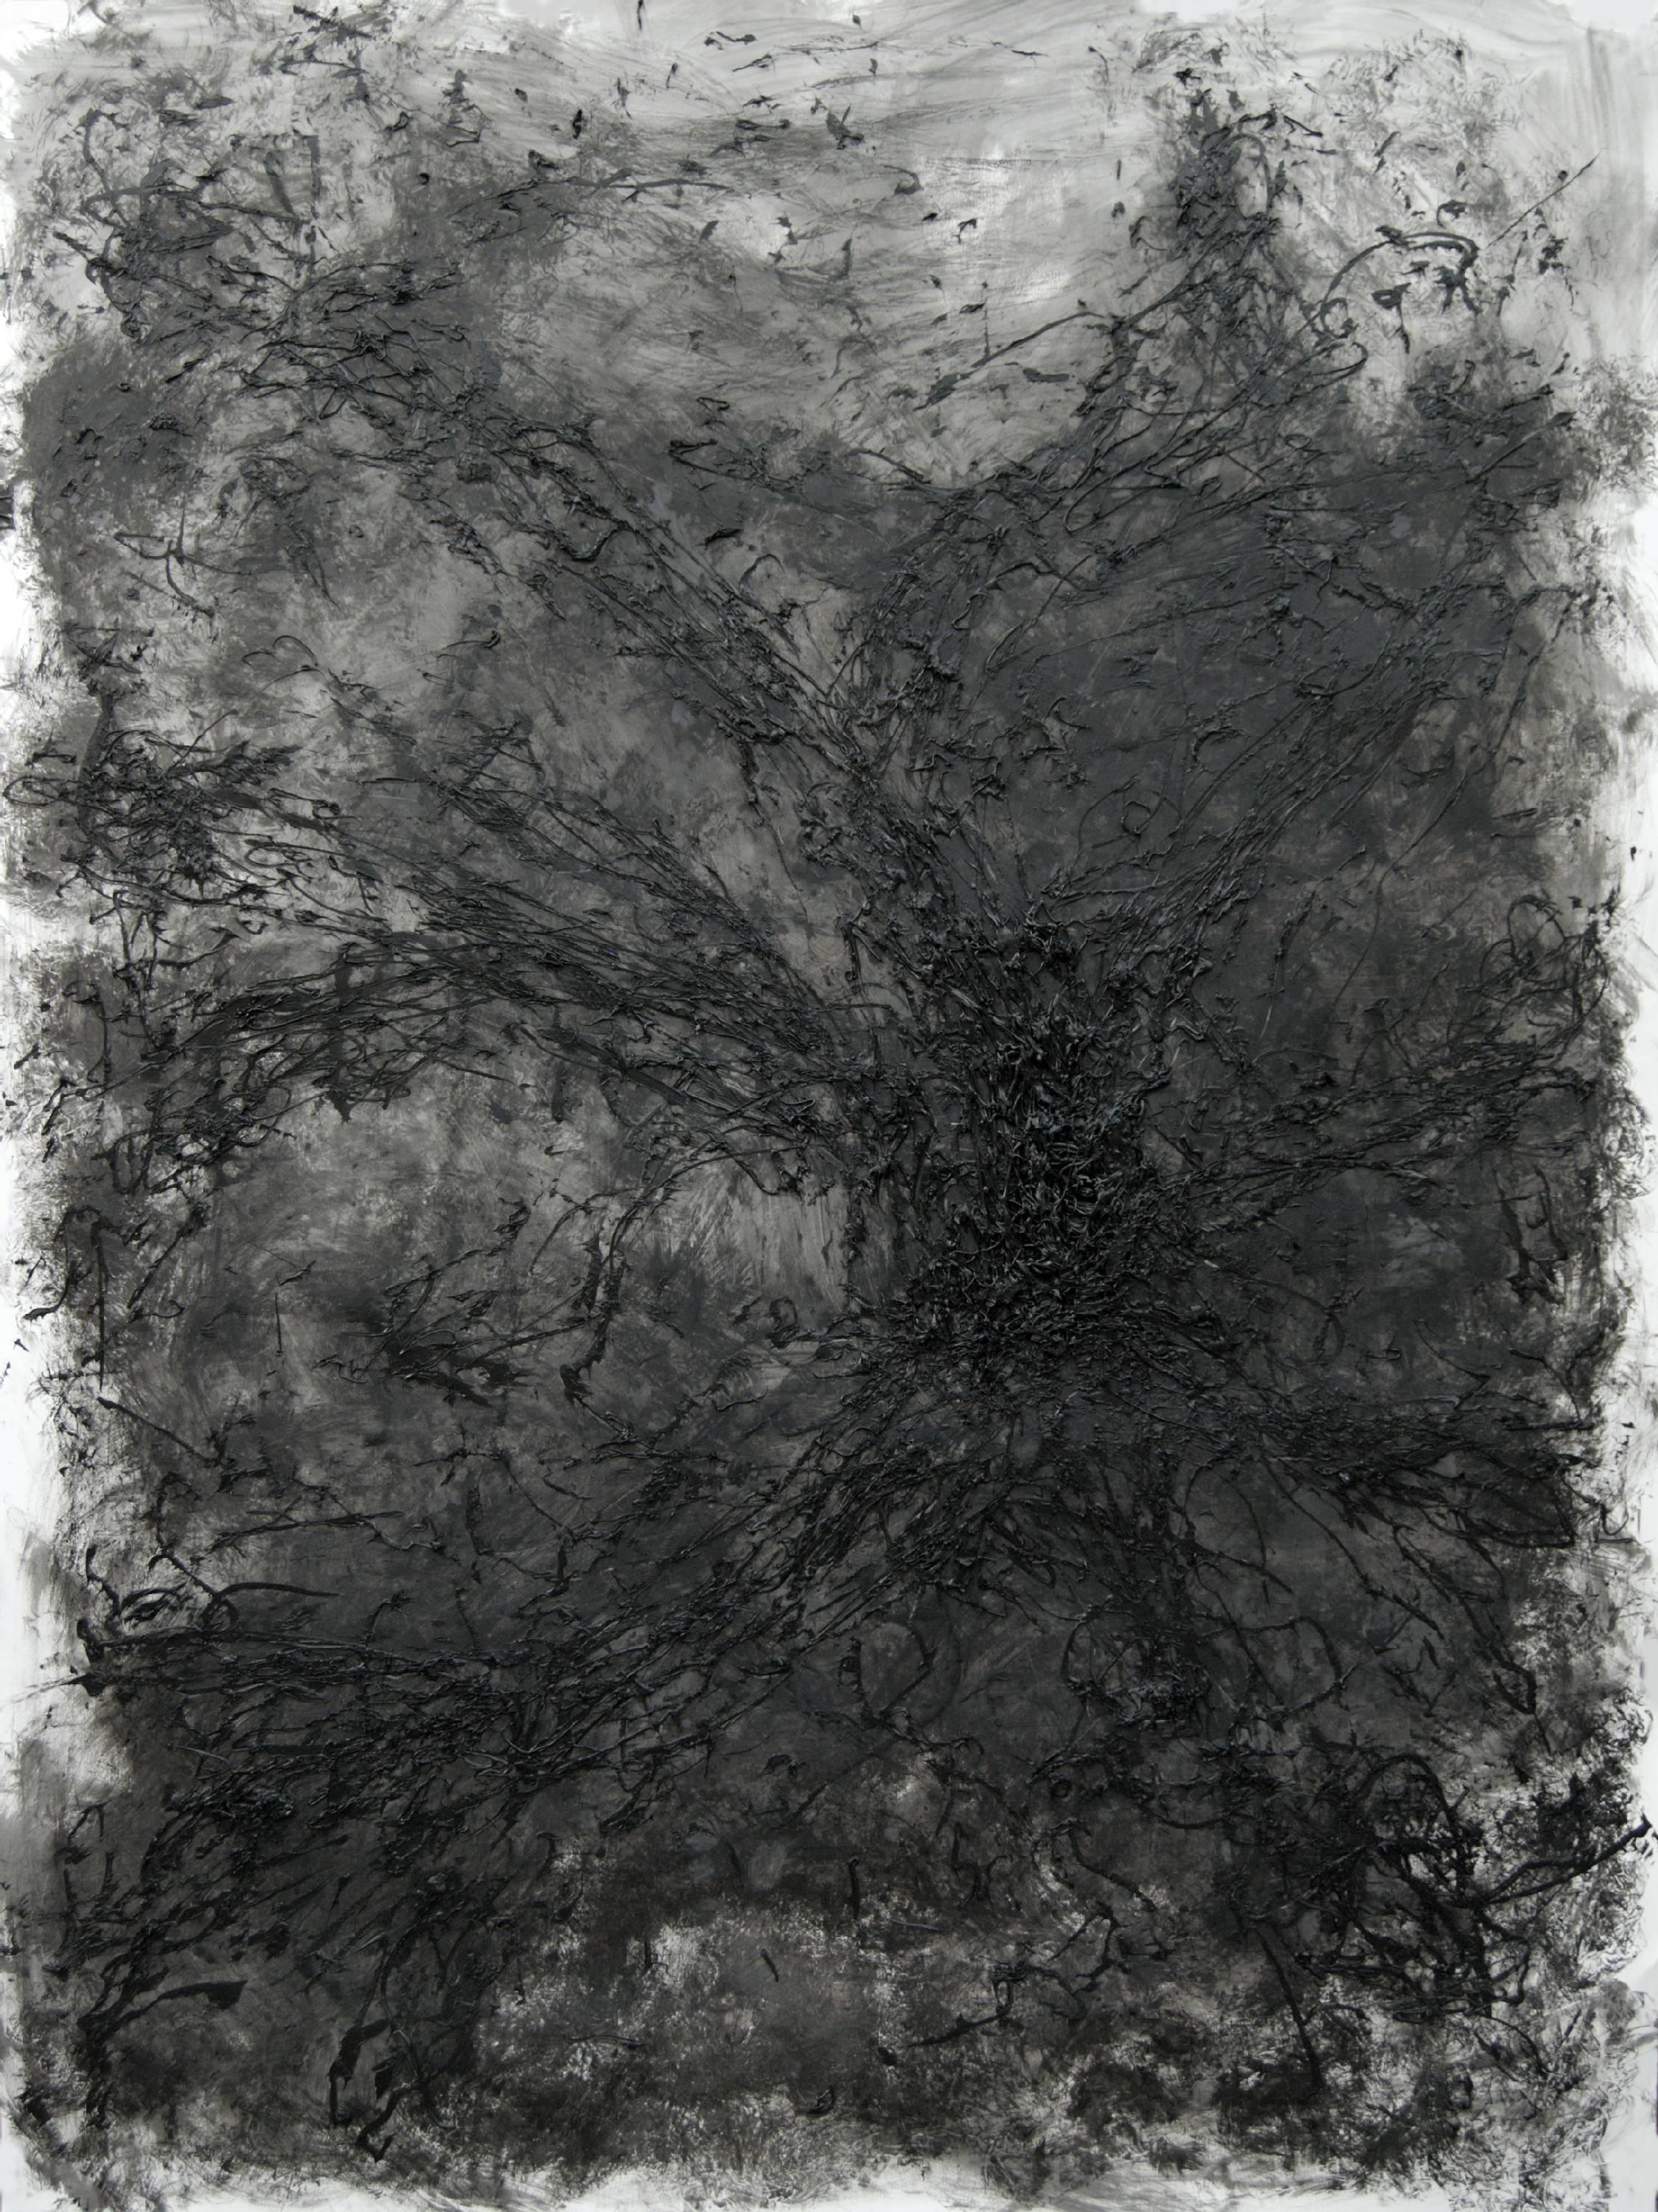 Untitled - 21st Century, Black, Monochrome, Abstract Drawing, Organic, Tactile